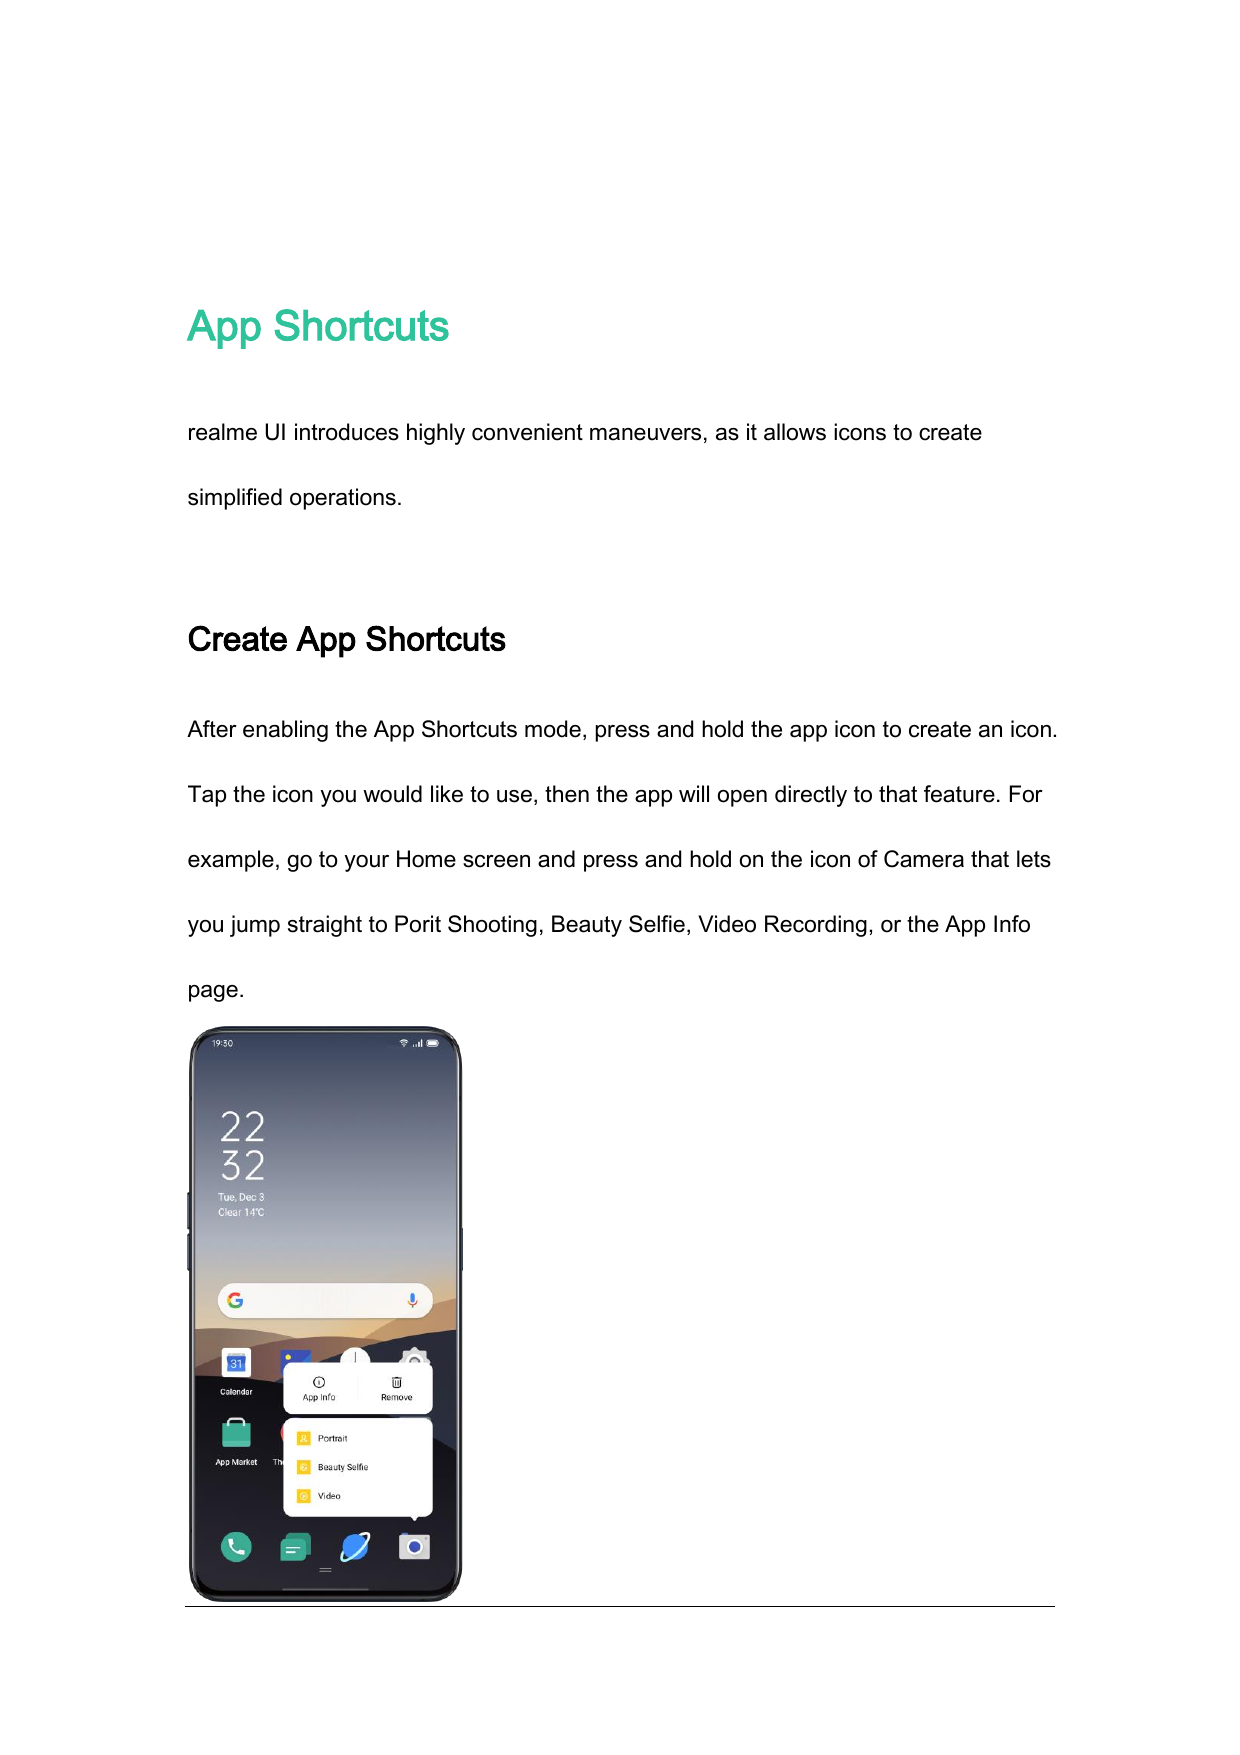 App Shortcutsrealme UI introduces highly convenient maneuvers, as it allows icons to createsimplified operations.Create App Shor